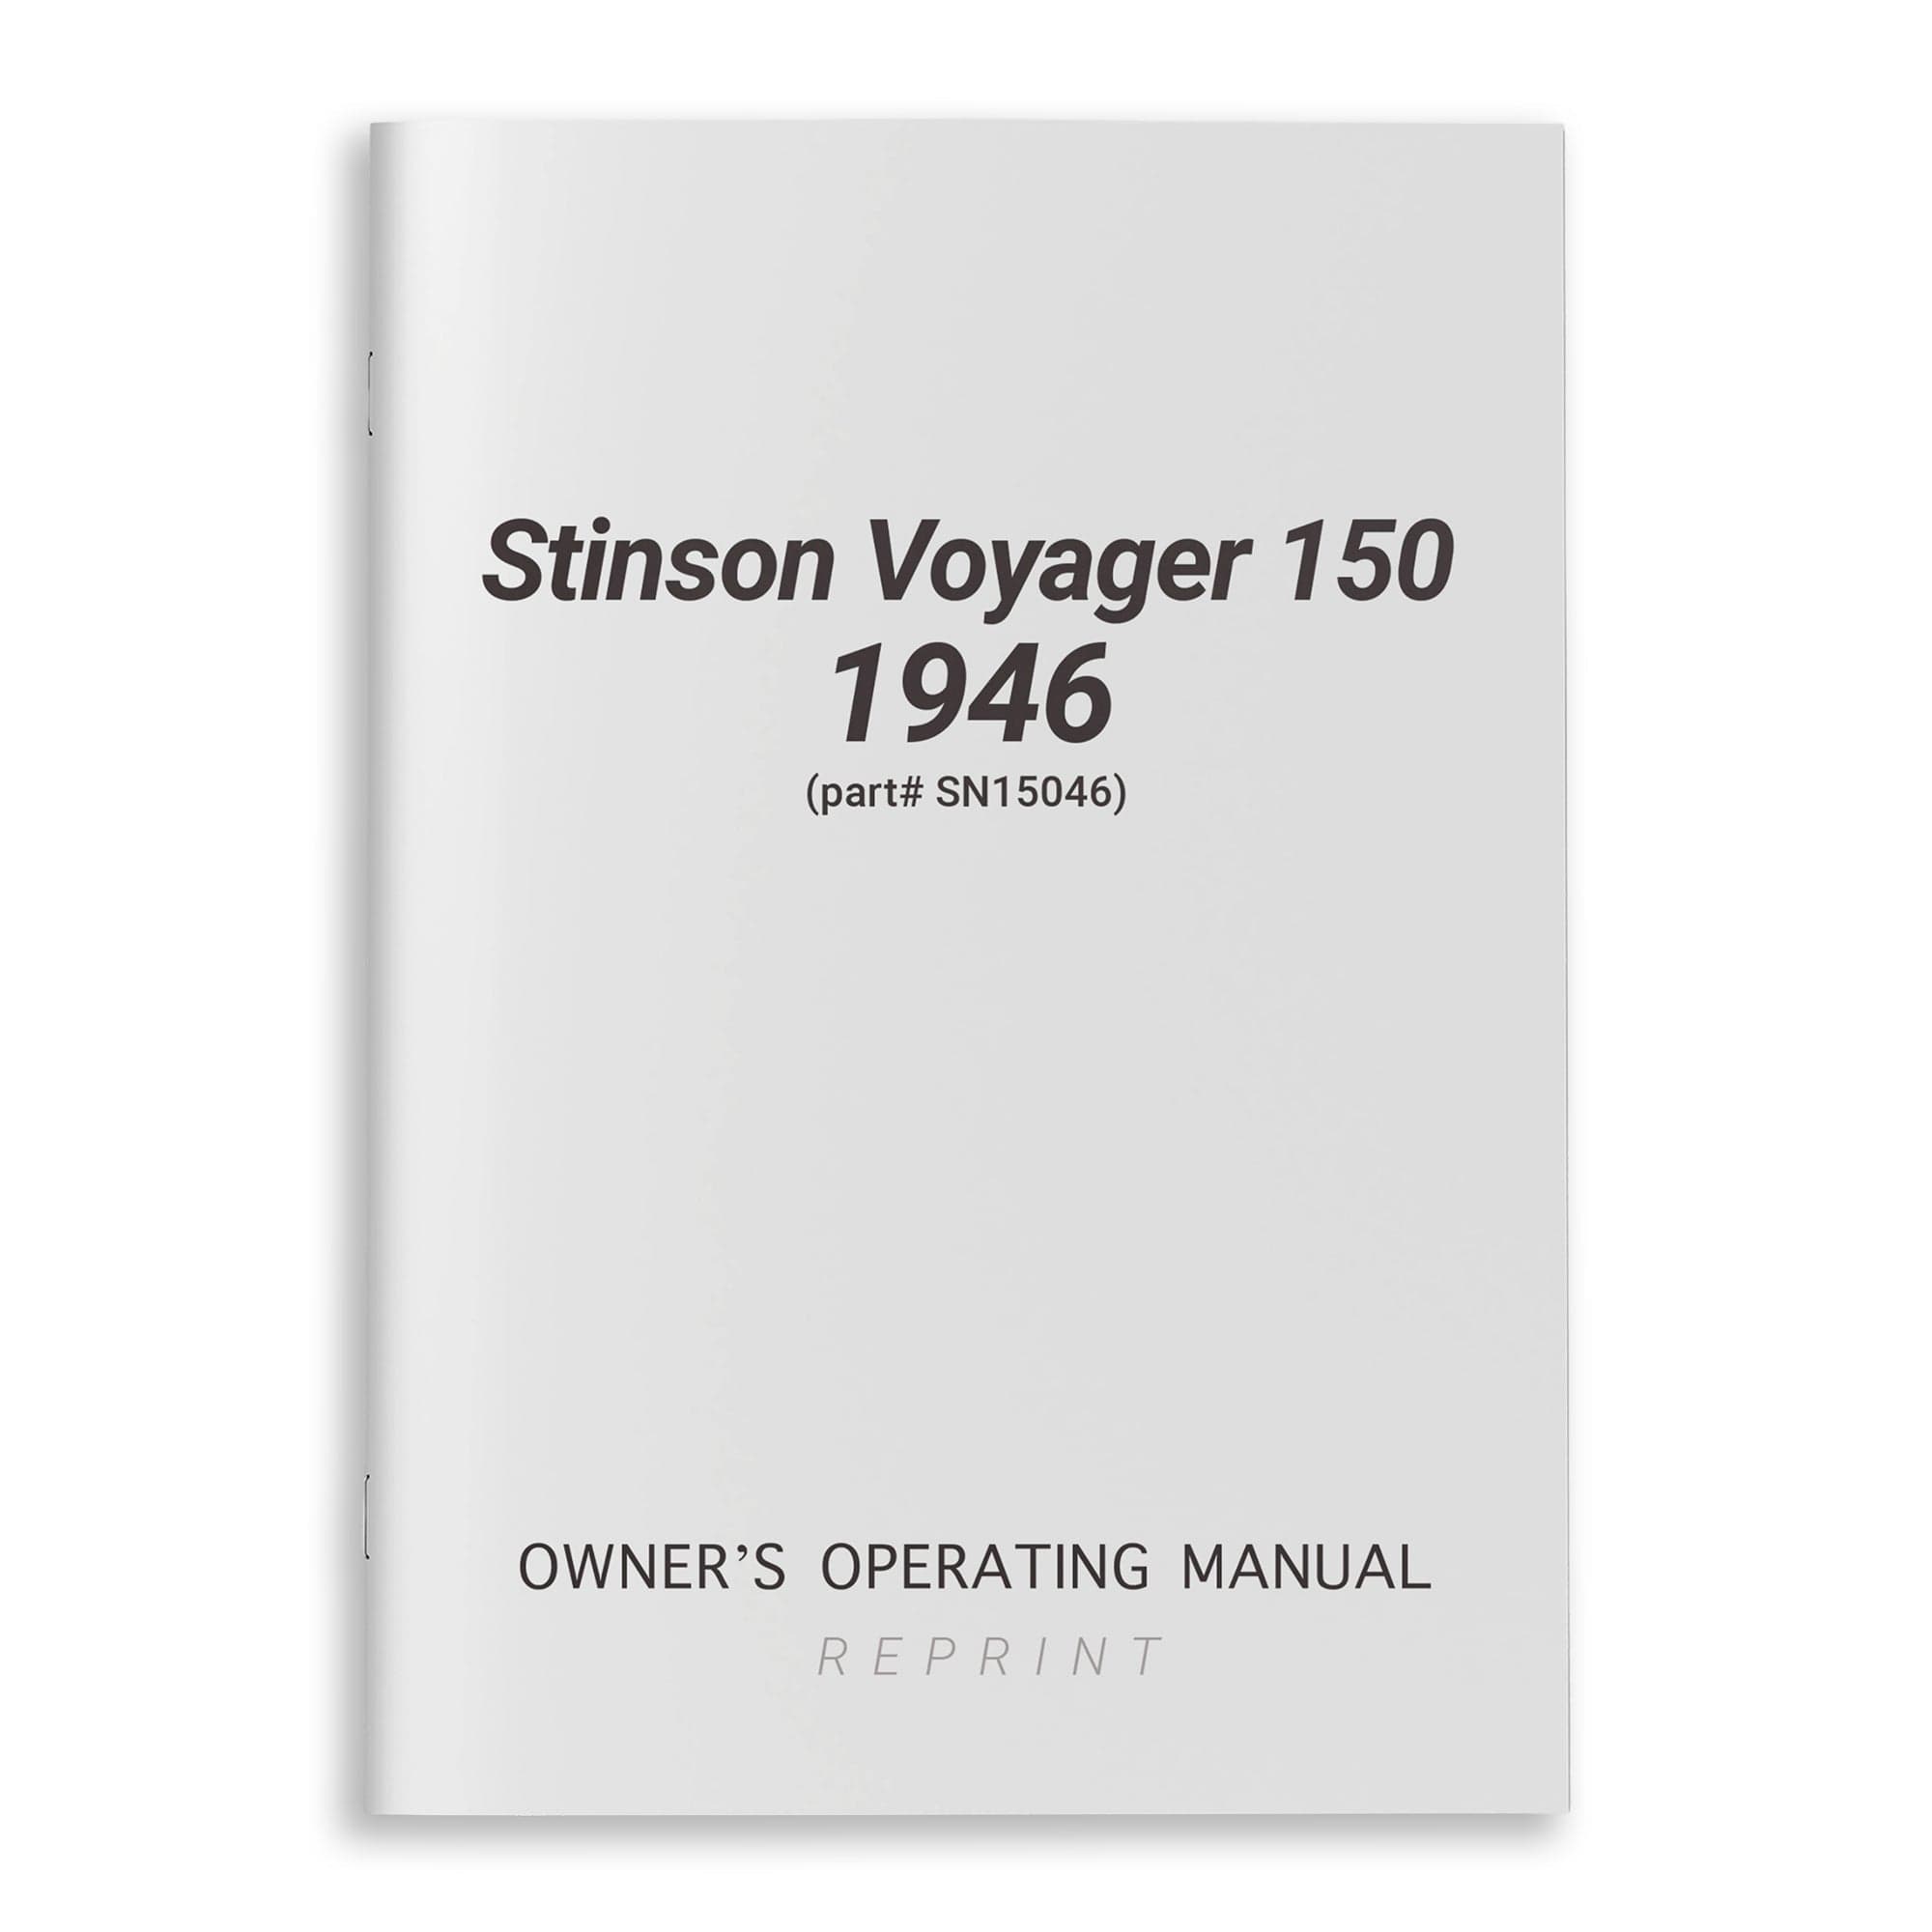 Stinson Voyager 150 1946 Owner's Operating Manual (part# SN15046)